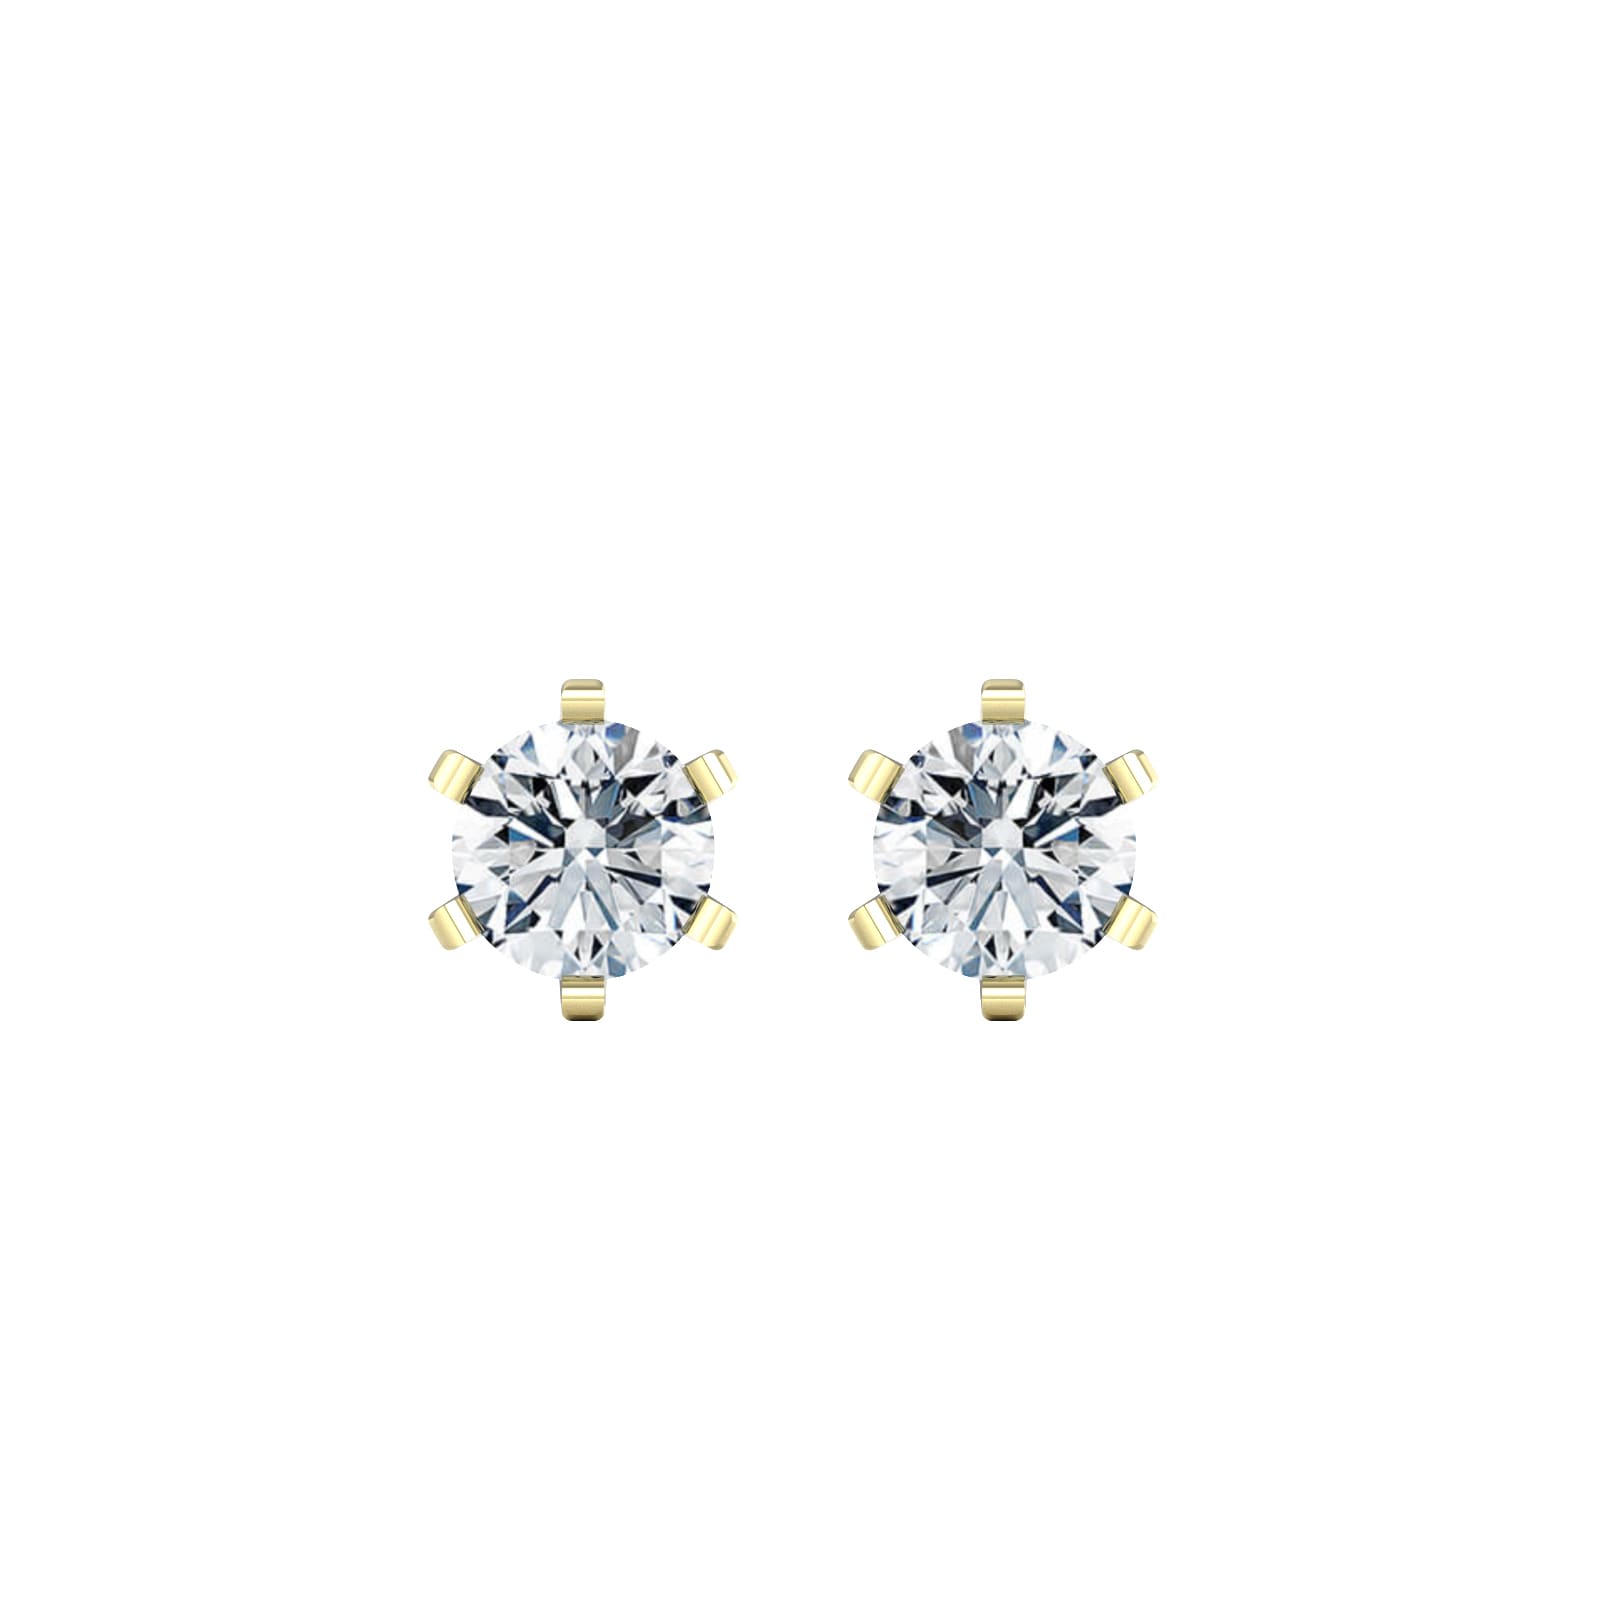 18ct Yellow Gold 0.60cttw Solitaire Diamond Stud Earrings